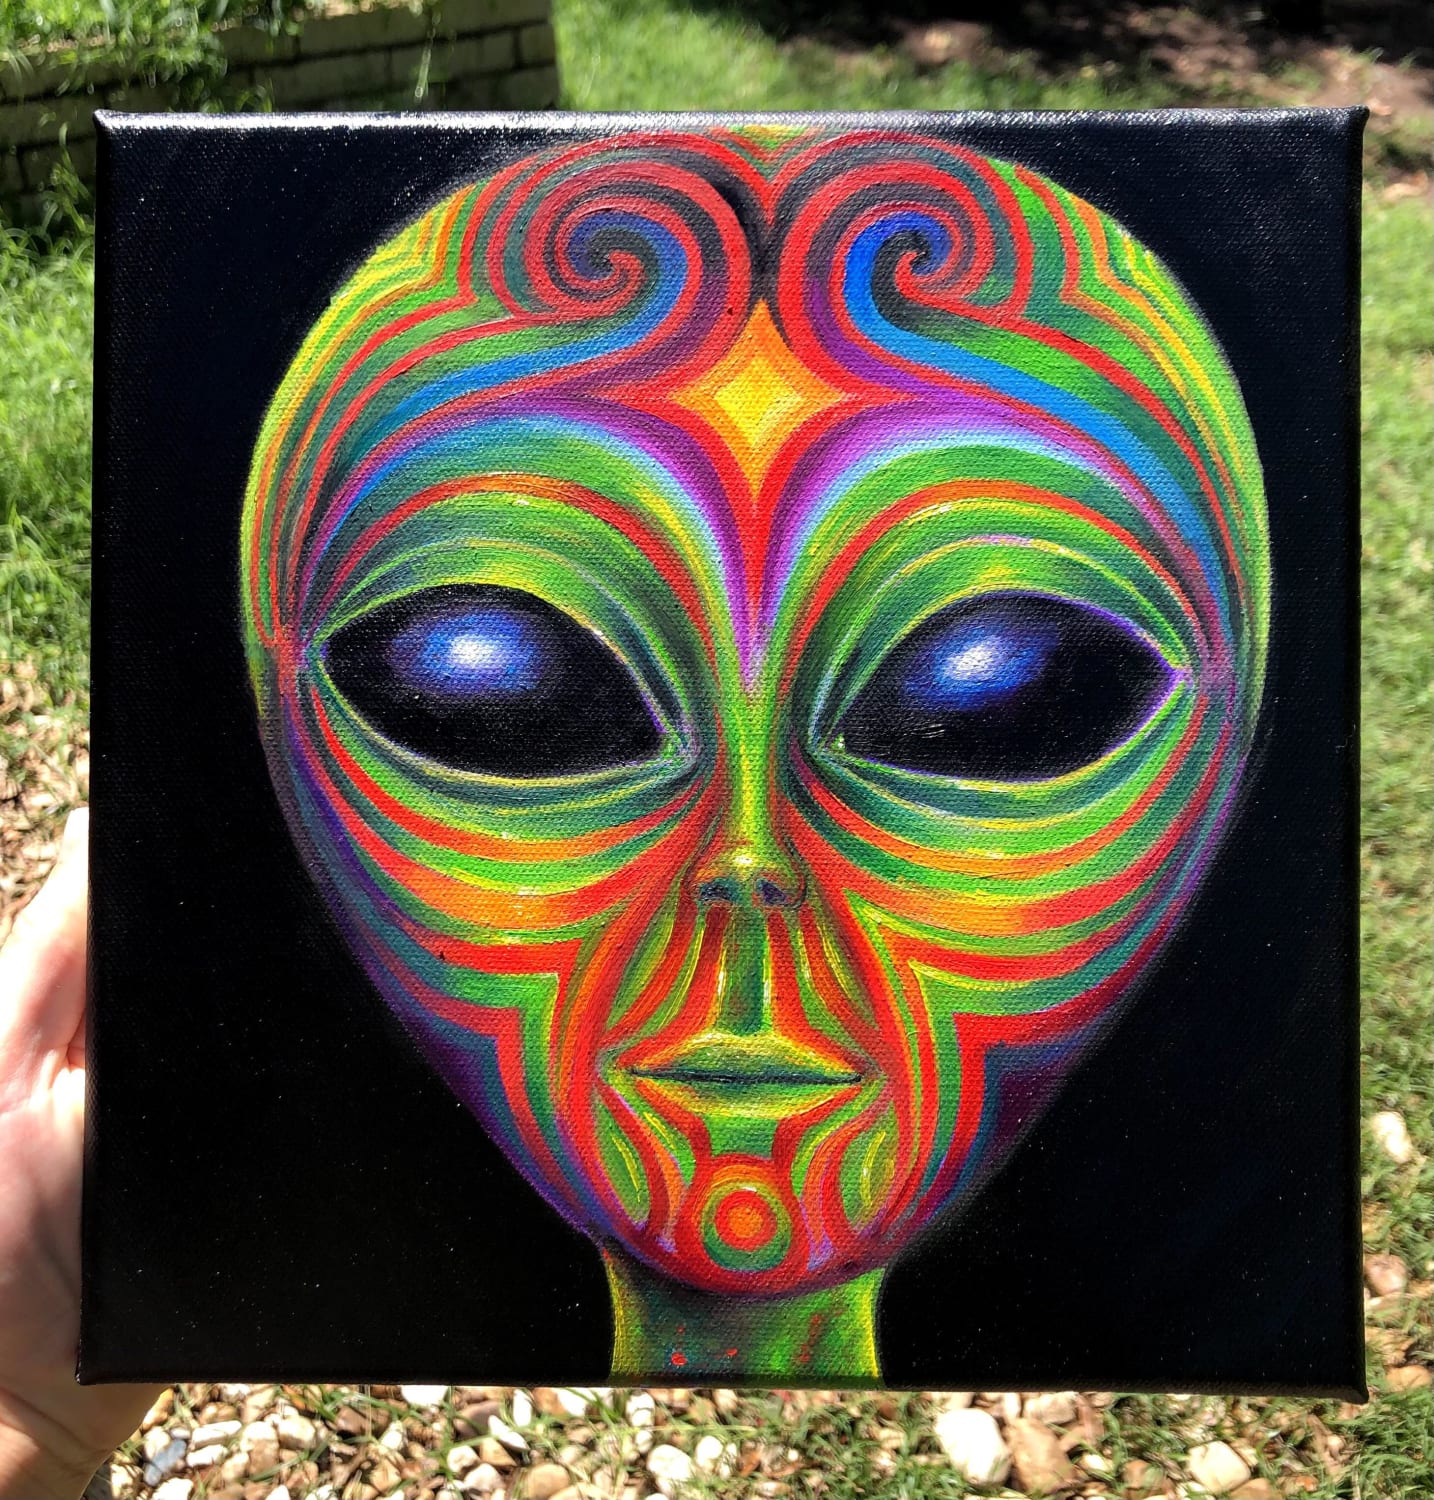 I painted an alien